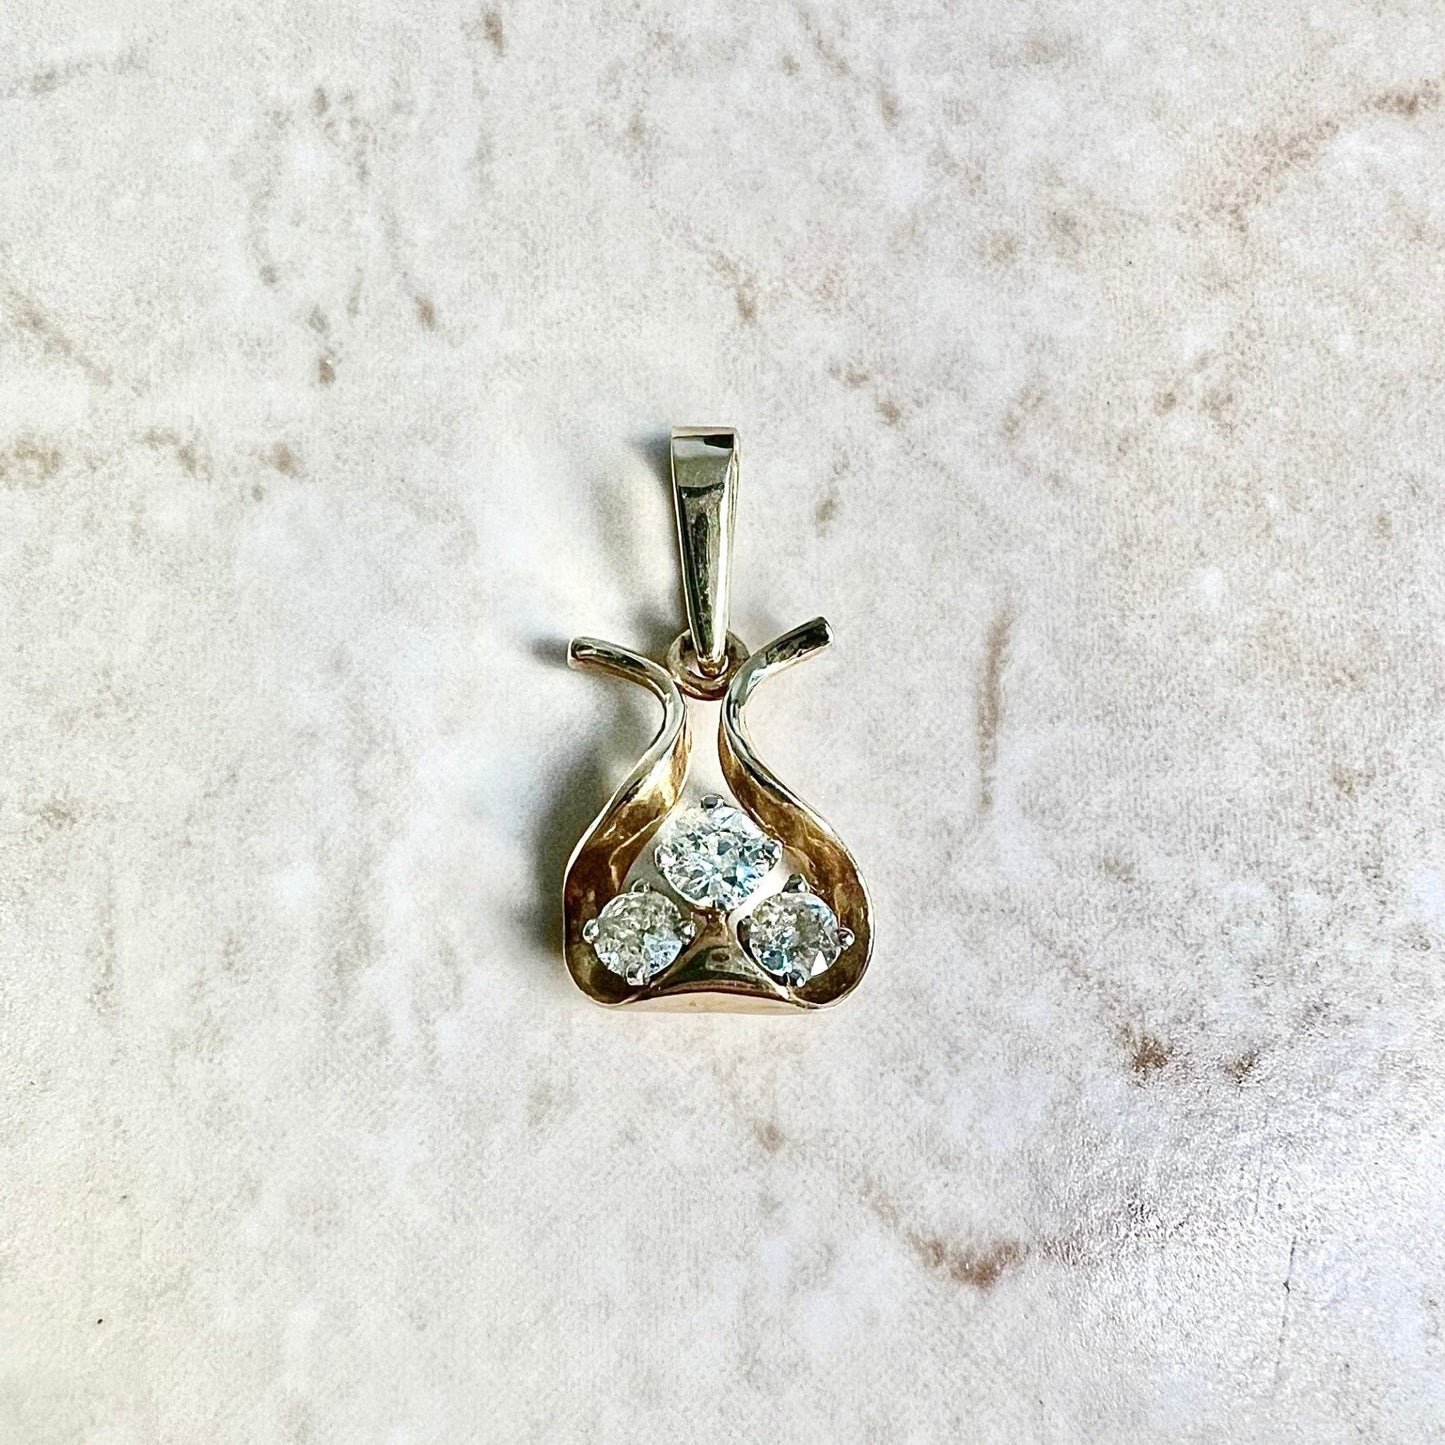 Fine Vintage 14K 3 Stone Diamond Pendant Necklace 0.60 CT - 14 Karat Two Tone Gold Diamond Necklace - Vintage Pendant -Best Gifts For Her